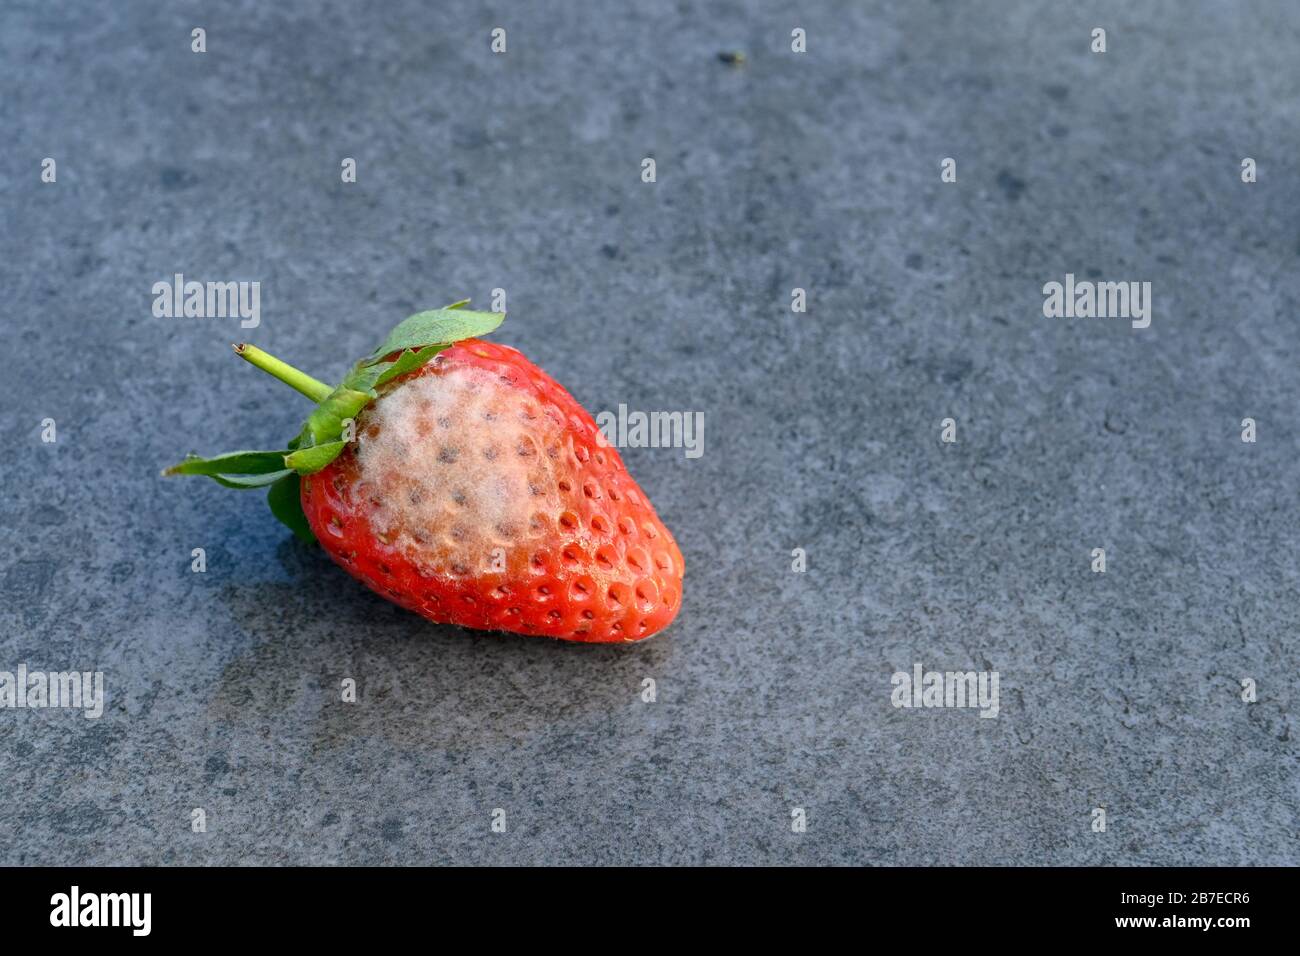 Close up view of a single strawberry with mould growing on the surface isolated against a plain grey background, Space for copy right. Stock Photo